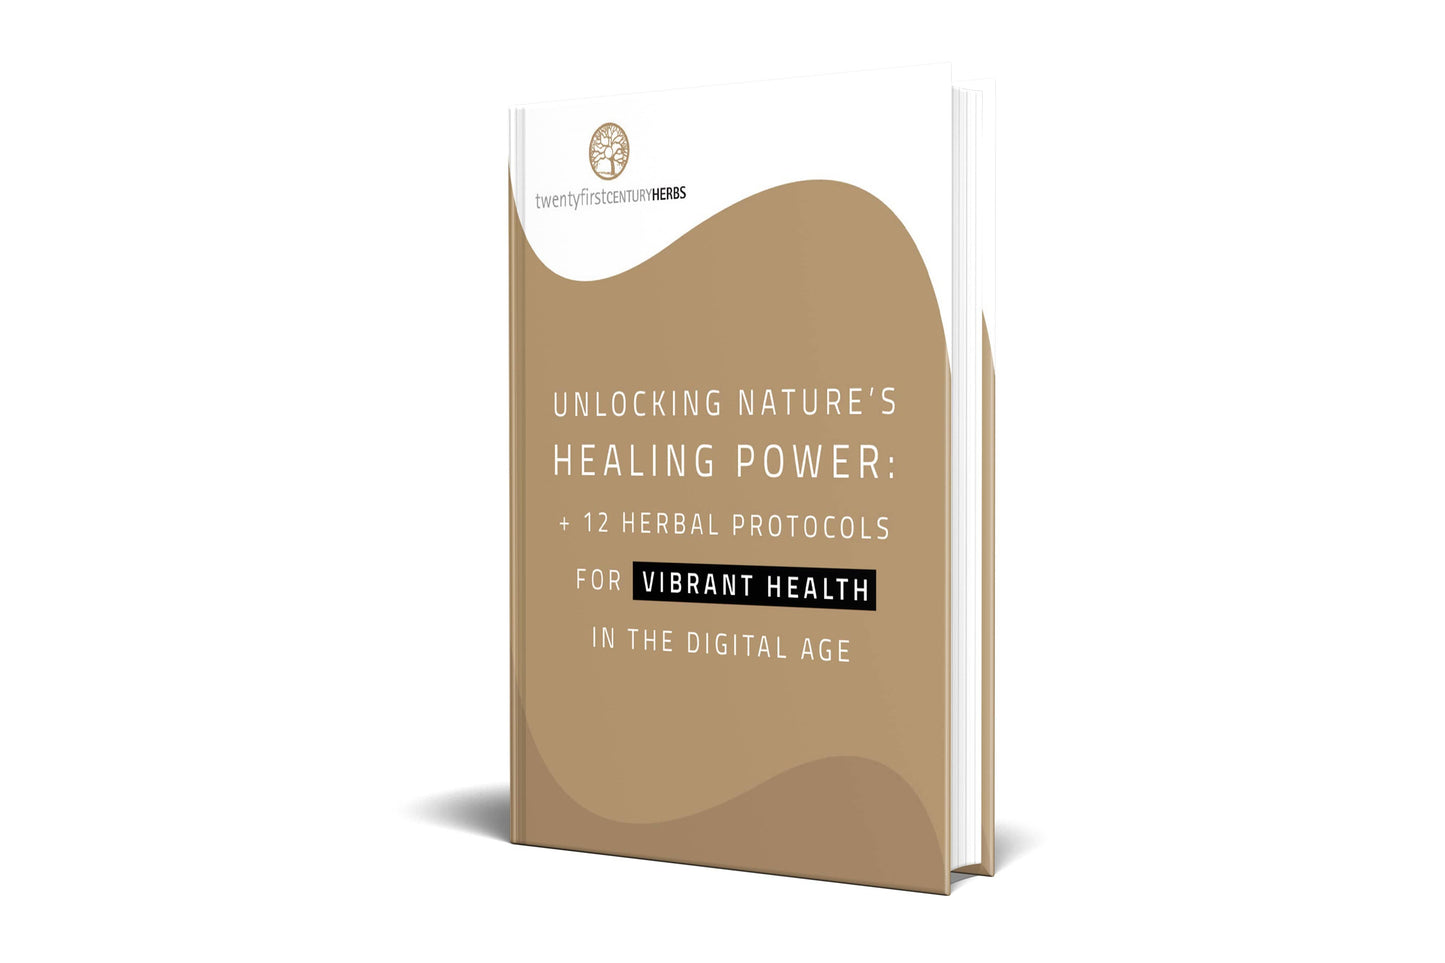 Unlocking Nature's Healing Power: 12 Herbal Protocols for Vibrant Health in the Digital Age